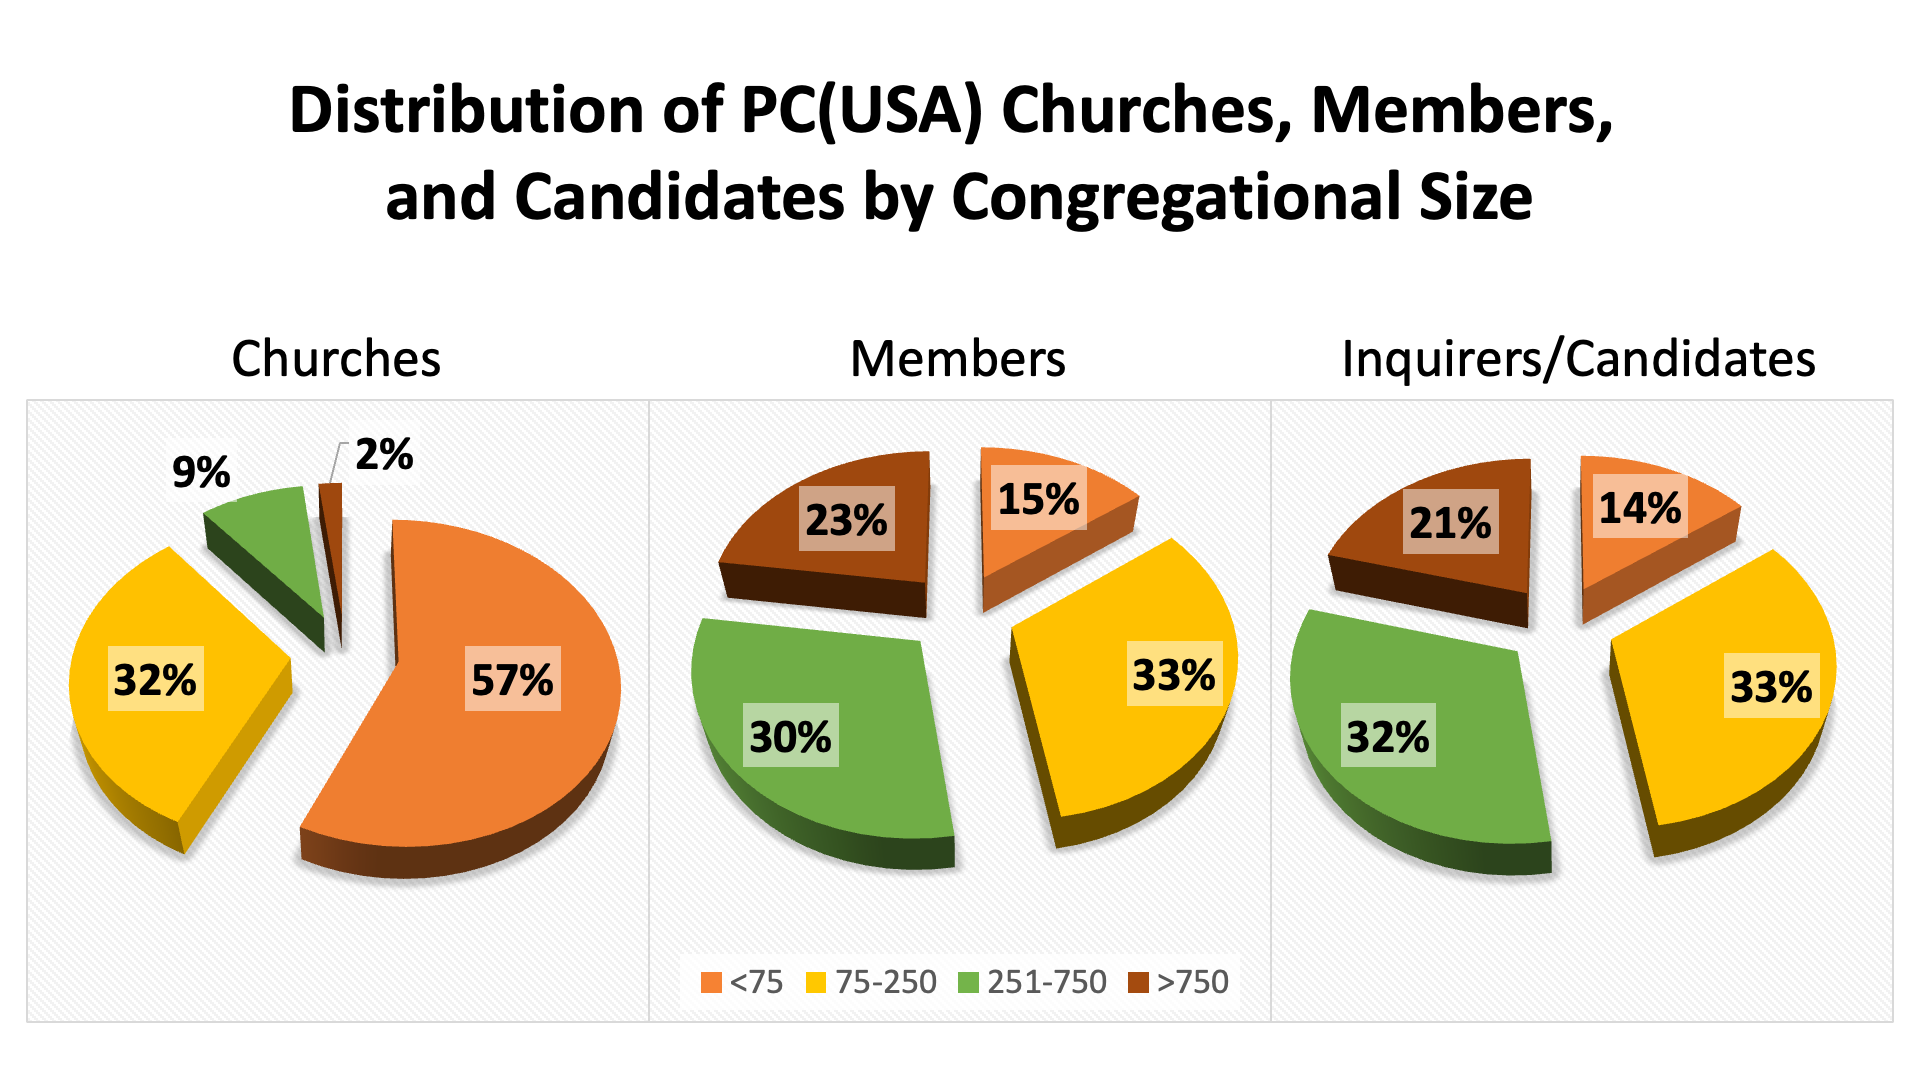 Chart showing distributions of congregations, members, and inquirers/candidates by size category.